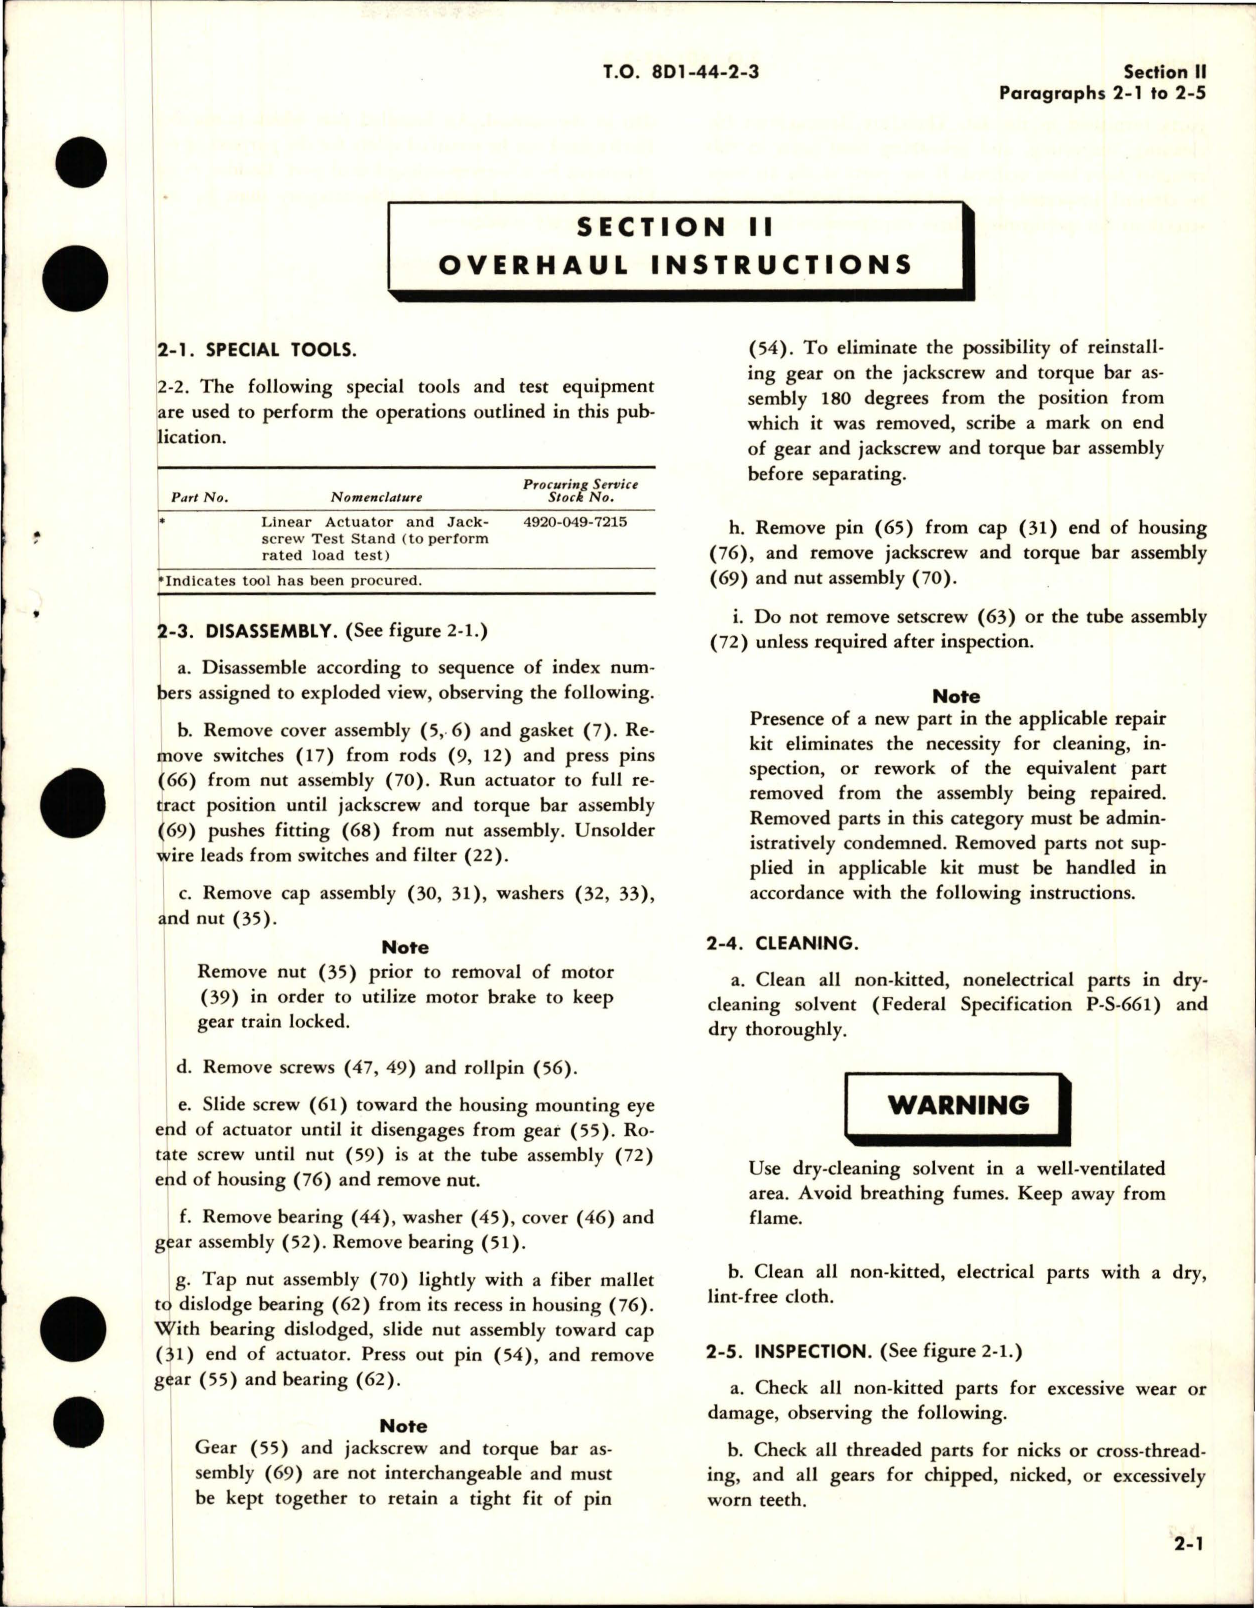 Sample page 7 from AirCorps Library document: Overhaul for Electromechanical Linear Actuators - Parts 31512 and 31512-1 